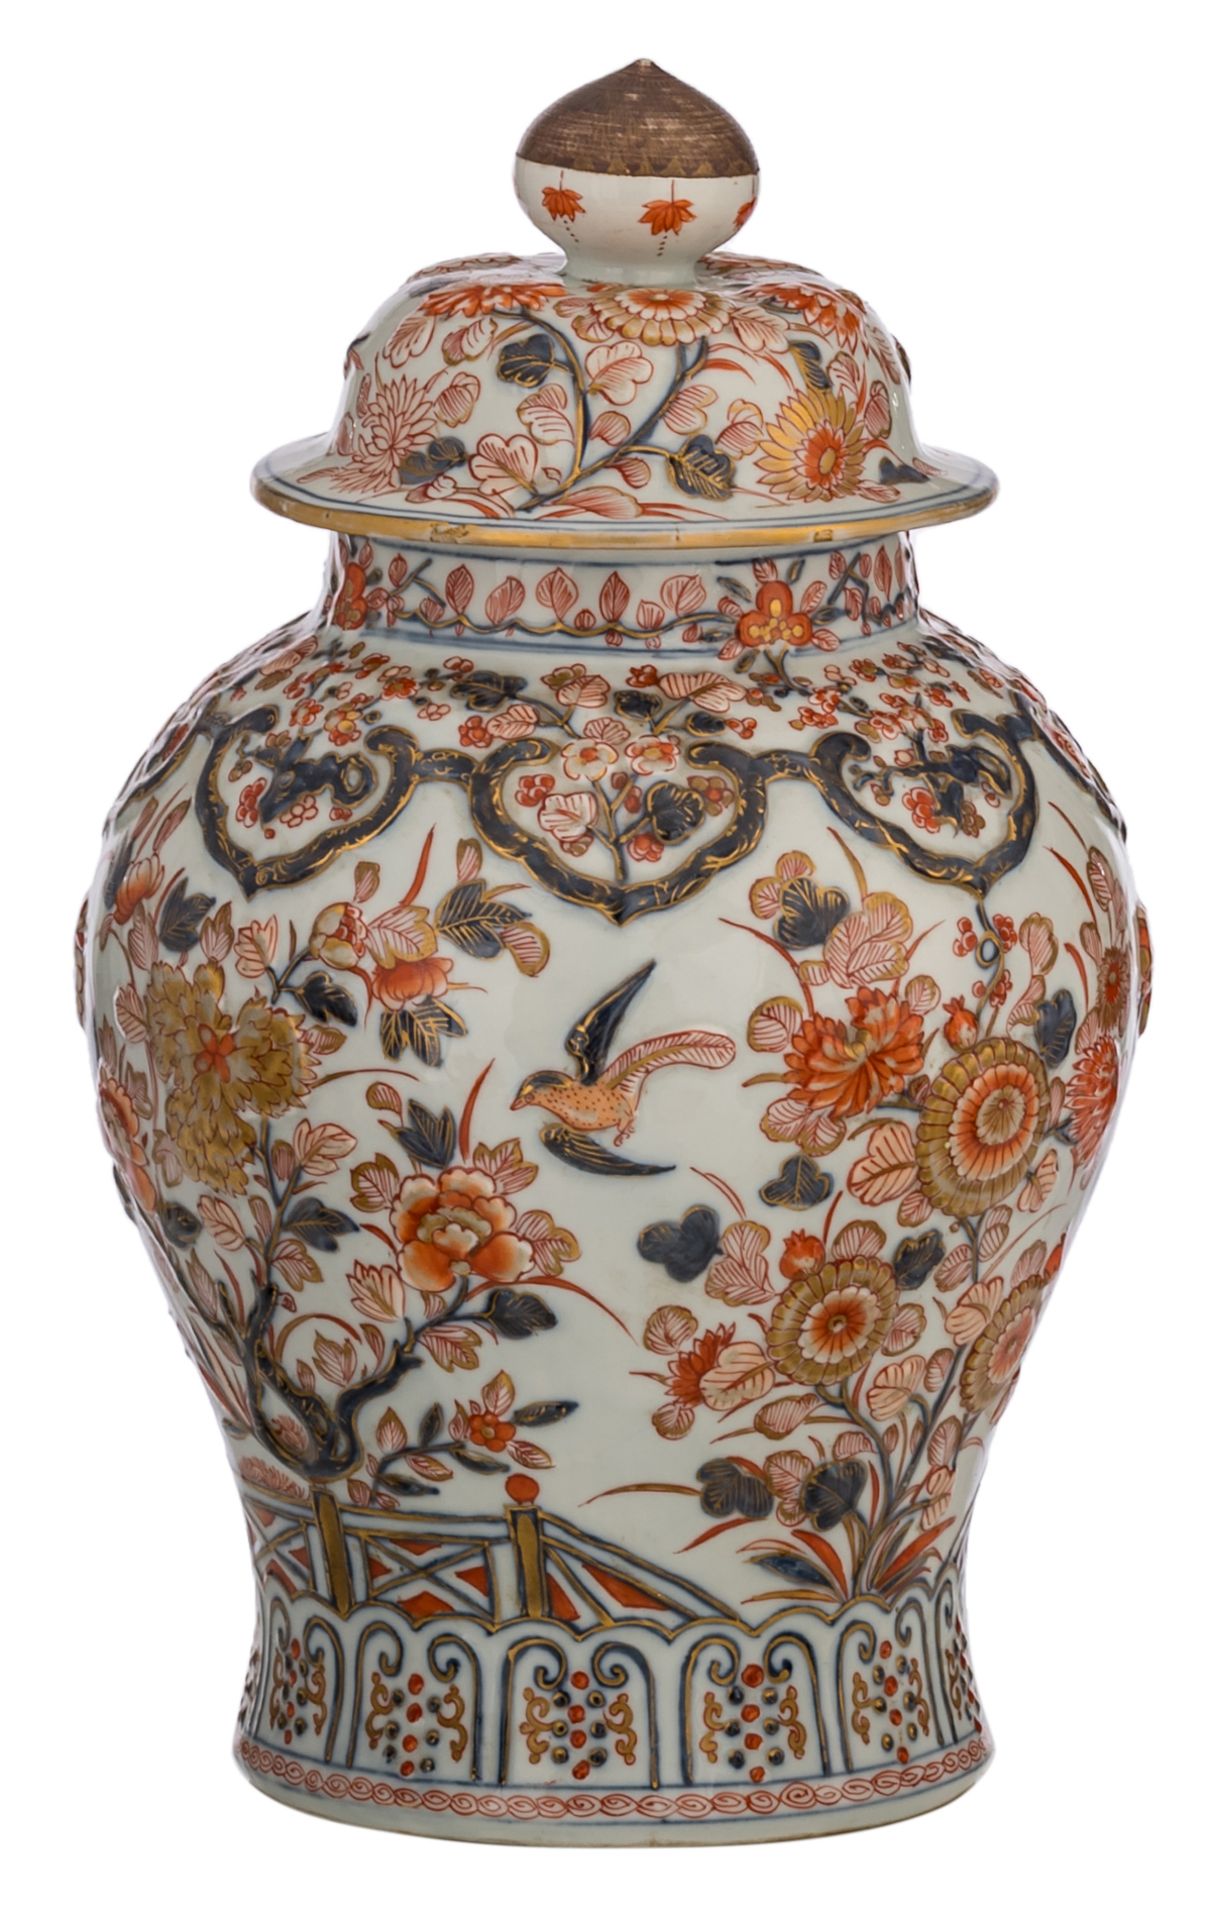 A Chinese Imari and relief decorated covered jar, 19thC, H 46,5 cm